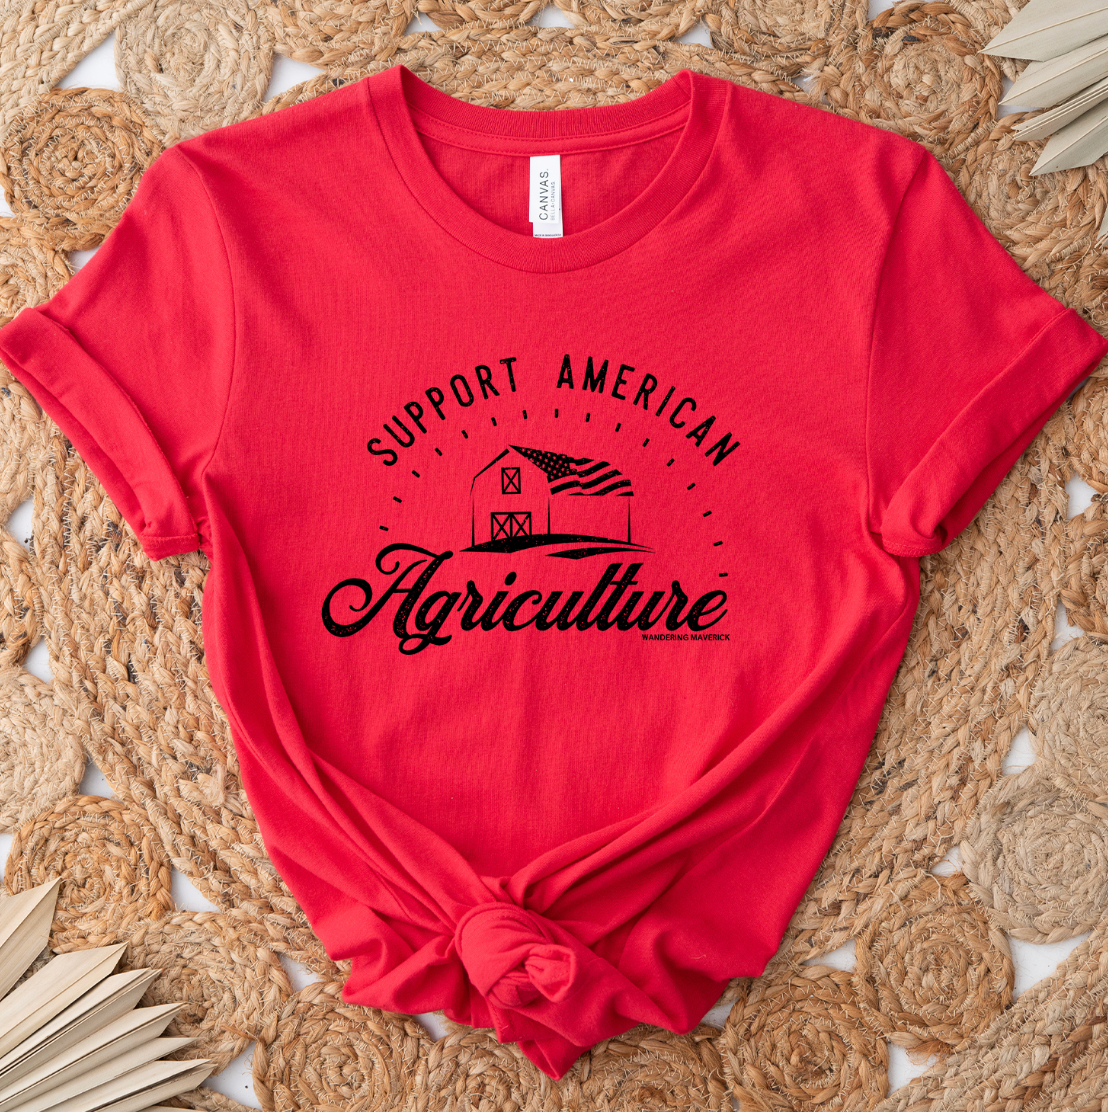 Support American Agriculture T-Shirt (XS-4XL) - Multiple Colors!